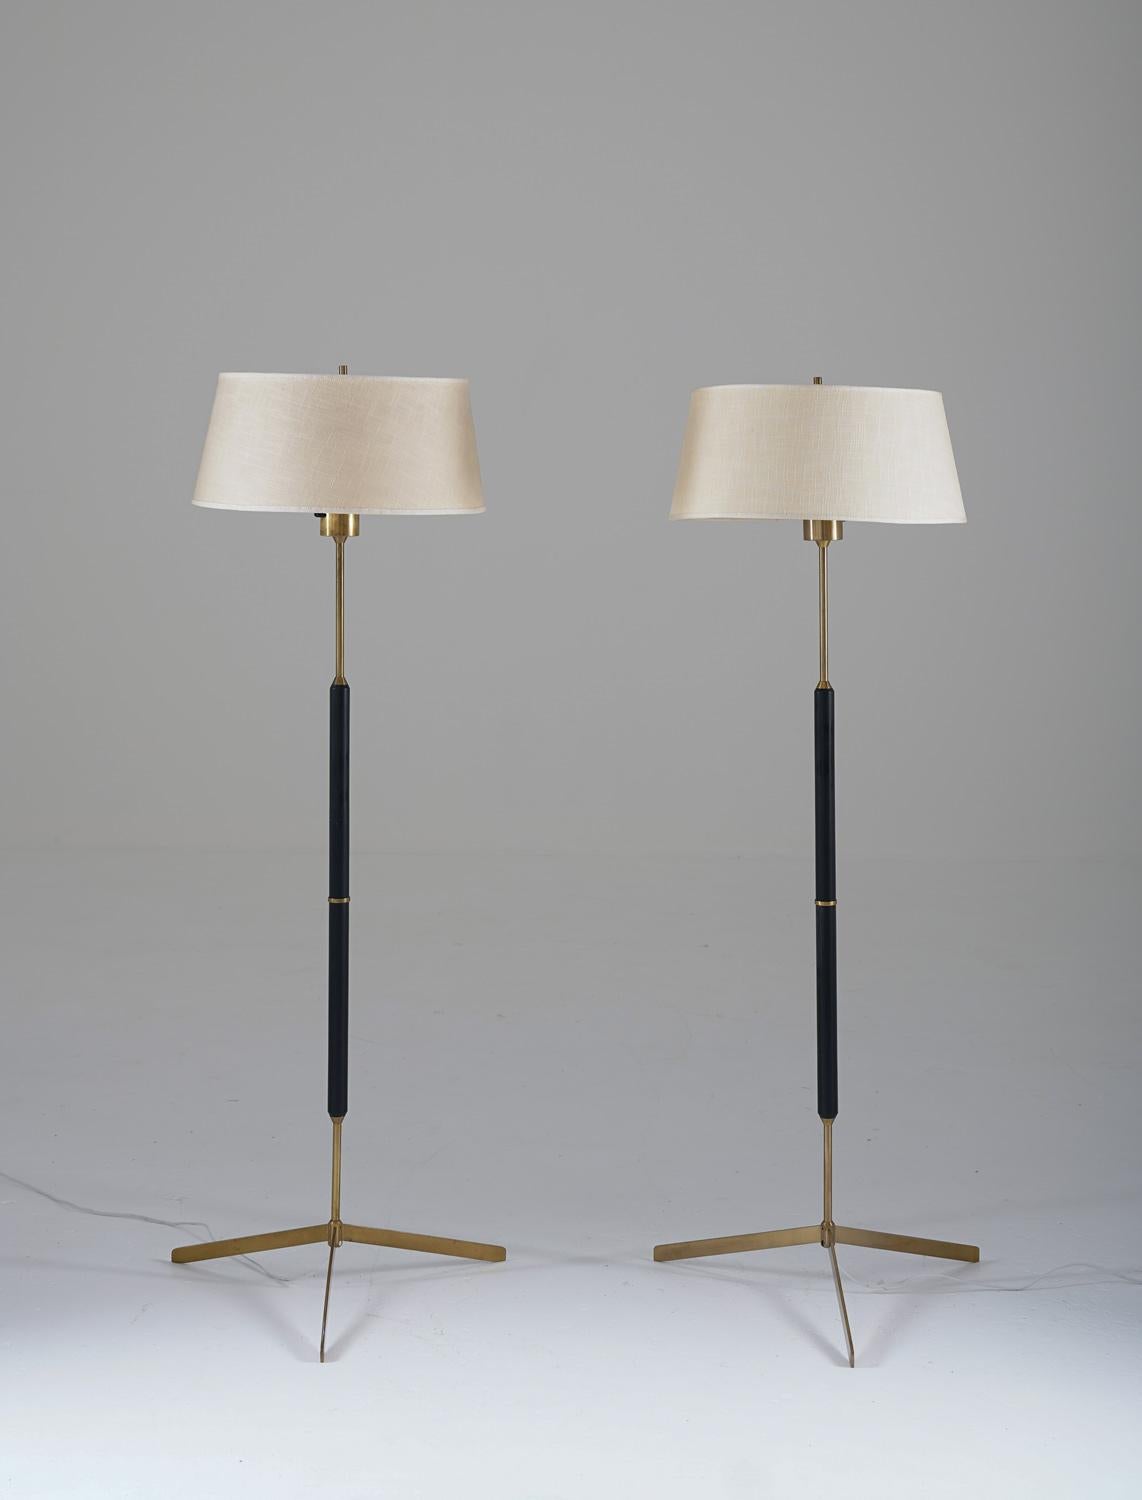 Scandinavian midcentury tripod floor lamps in brass and wood, model G-31 by Bergboms, Sweden, 1950s.
These lamps are made of solid brass, with details of black painted wood. The lamps come with their original shades and diffusers.

Condition: